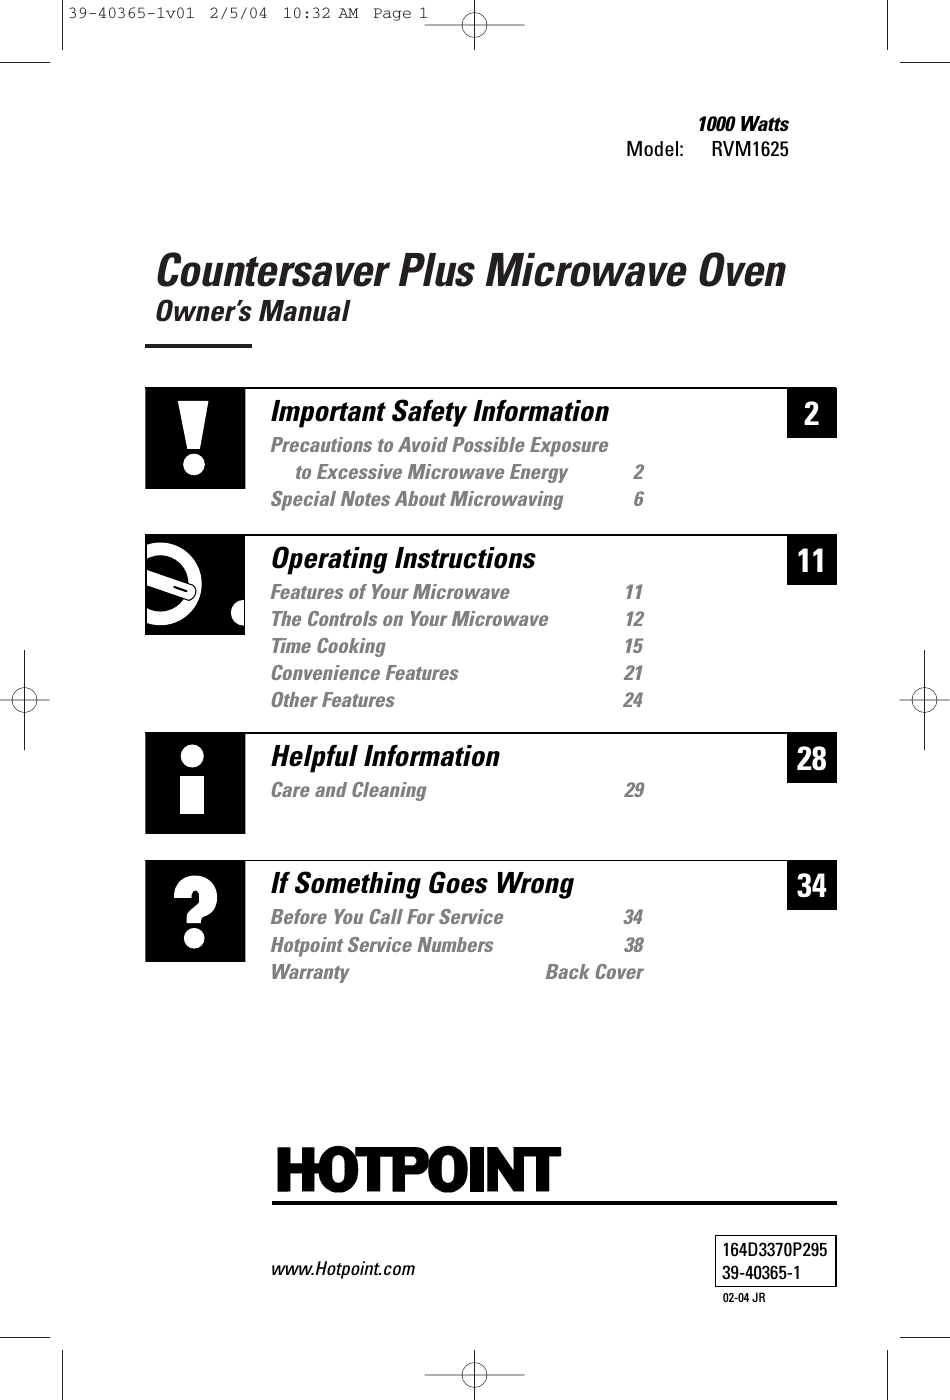 Countersaver Plus Microwave OvenOwner’s ManualModel: 1000 WattsRVM1625228Helpful InformationCare and Cleaning 2934If Something Goes WrongBefore You Call For Service 34Hotpoint Service Numbers 38Warranty Back Cover11Important Safety InformationPrecautions to Avoid Possible Exposure to Excessive Microwave Energy 2Special Notes About Microwaving 6Operating InstructionsFeatures of Your Microwave 11The Controls on Your Microwave 12Time Cooking 15Convenience Features 21Other Features 24164D3370P29539-40365-102-04 JRwww.Hotpoint.com39-40365-1v01  2/5/04  10:32 AM  Page 1